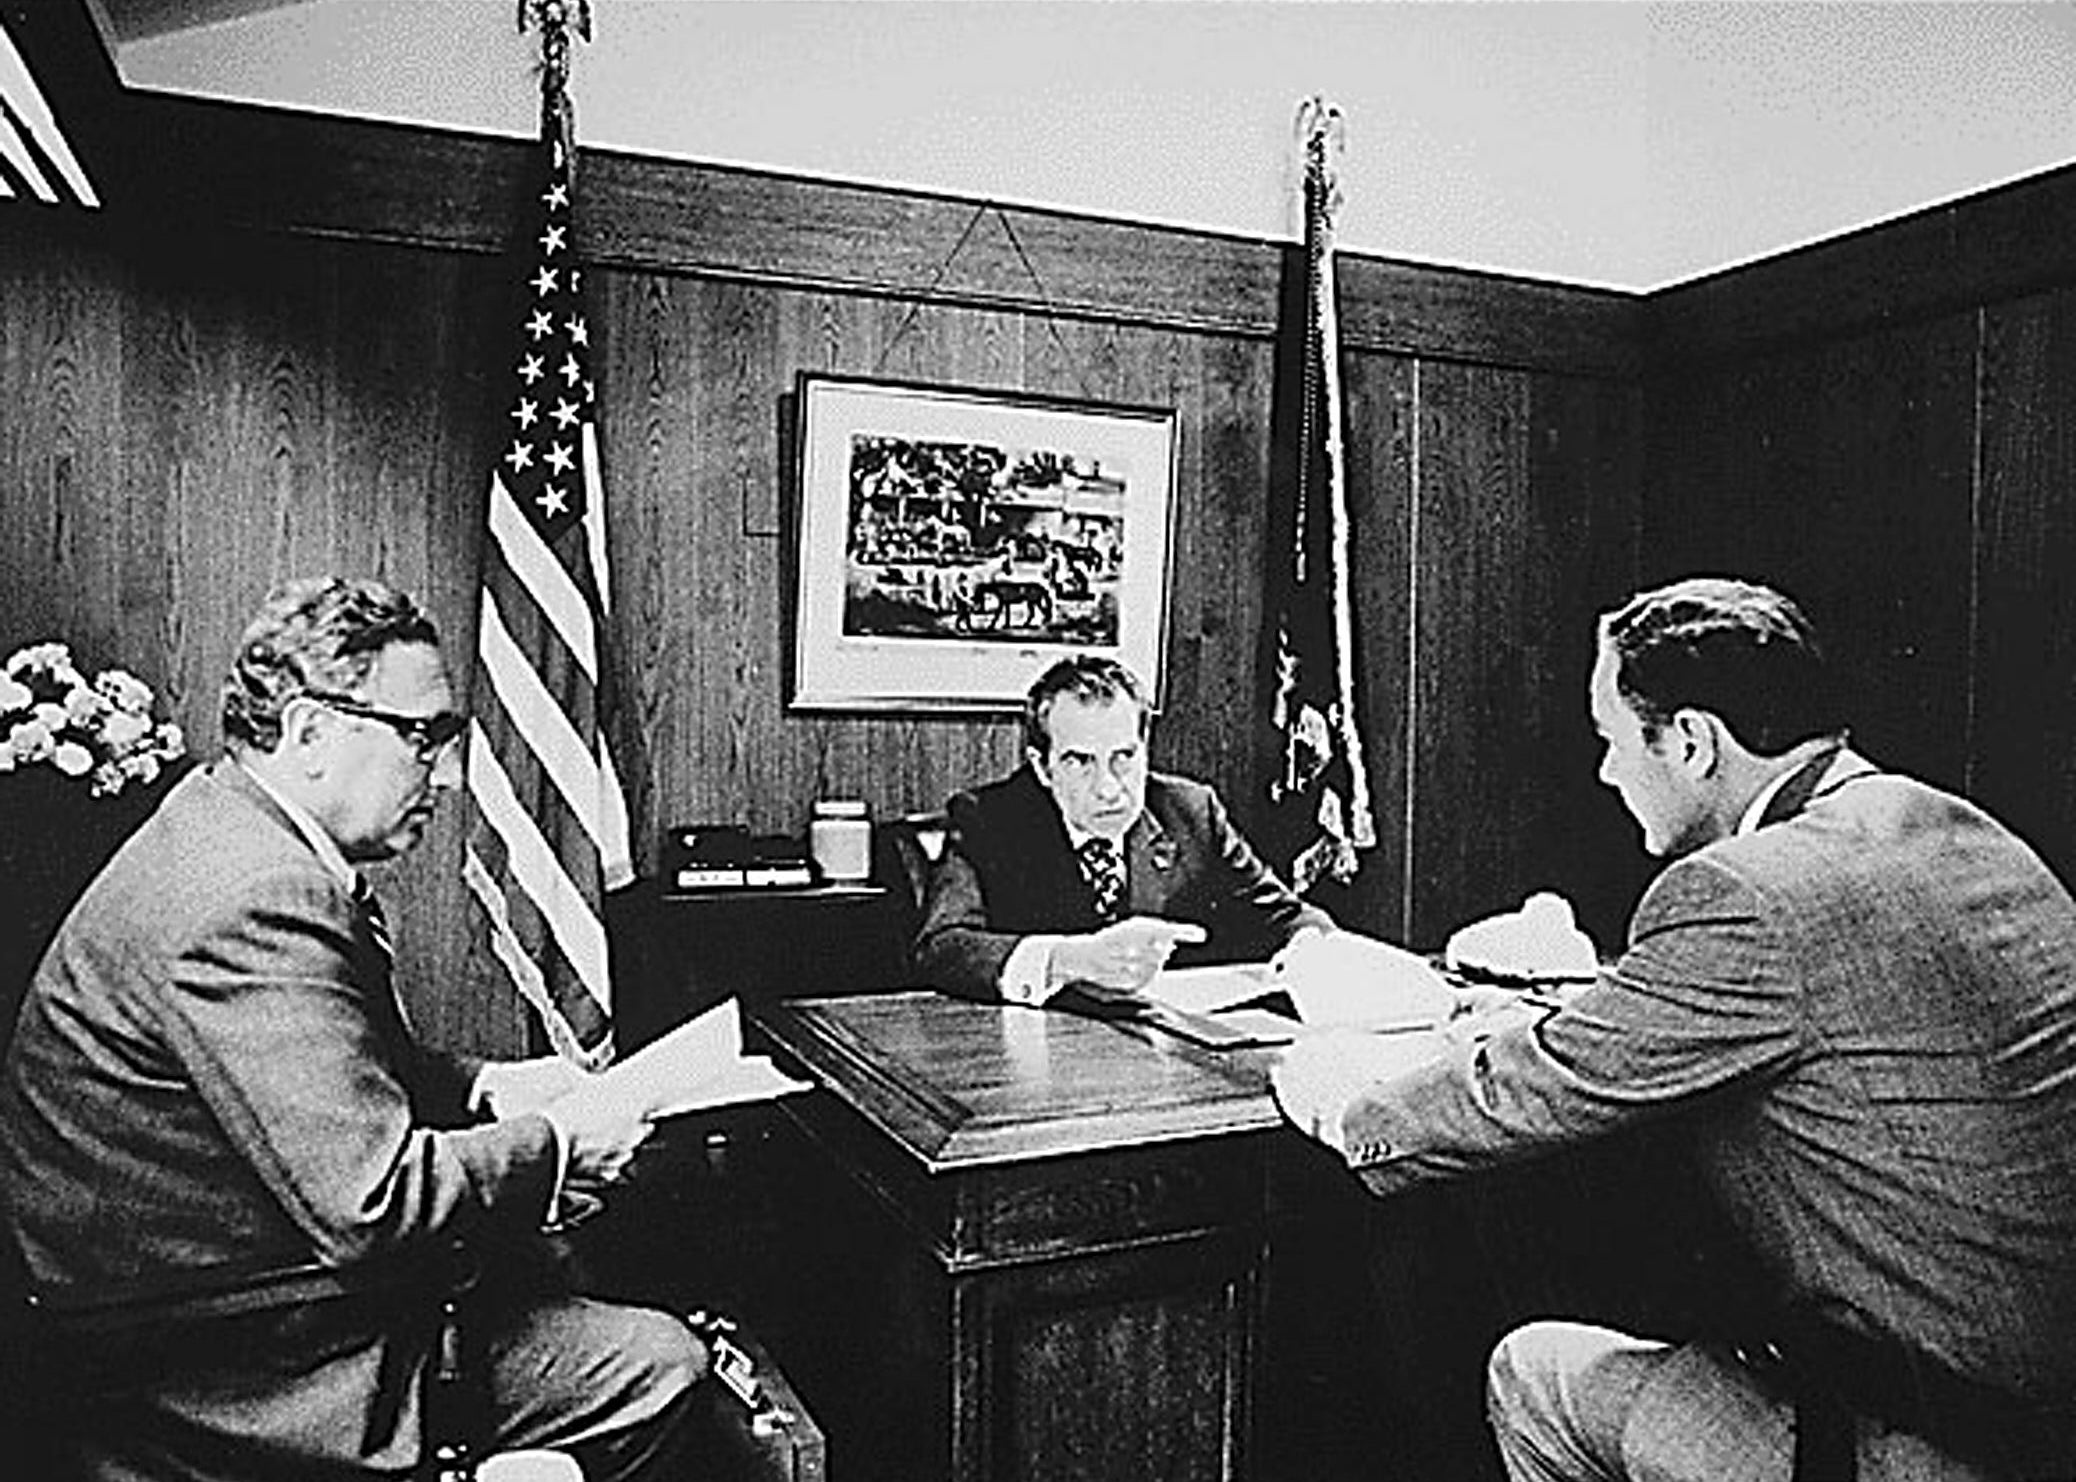 President Nixon in a Vietnam War planning meeting in November 1972, just a few months after the Watergate burglary but two years before finally being forced to resign over it